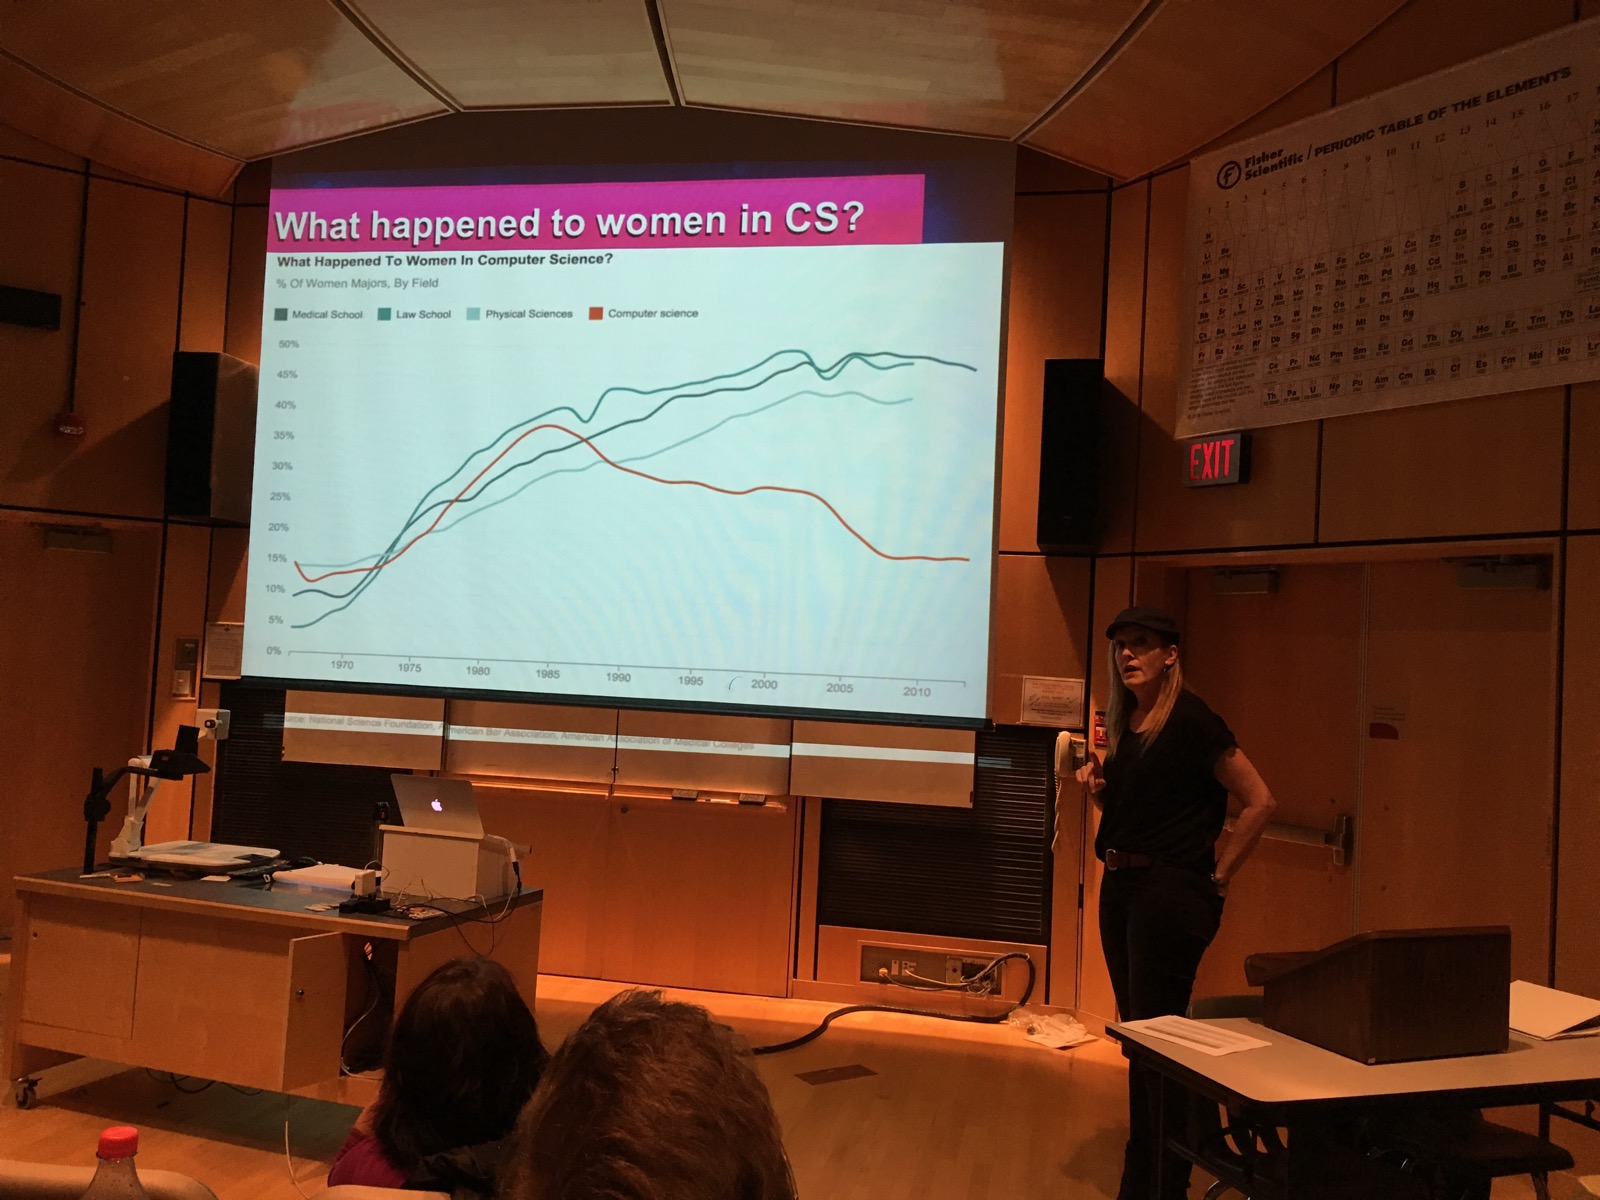 Gershkovitch showing the decline of women in computer science